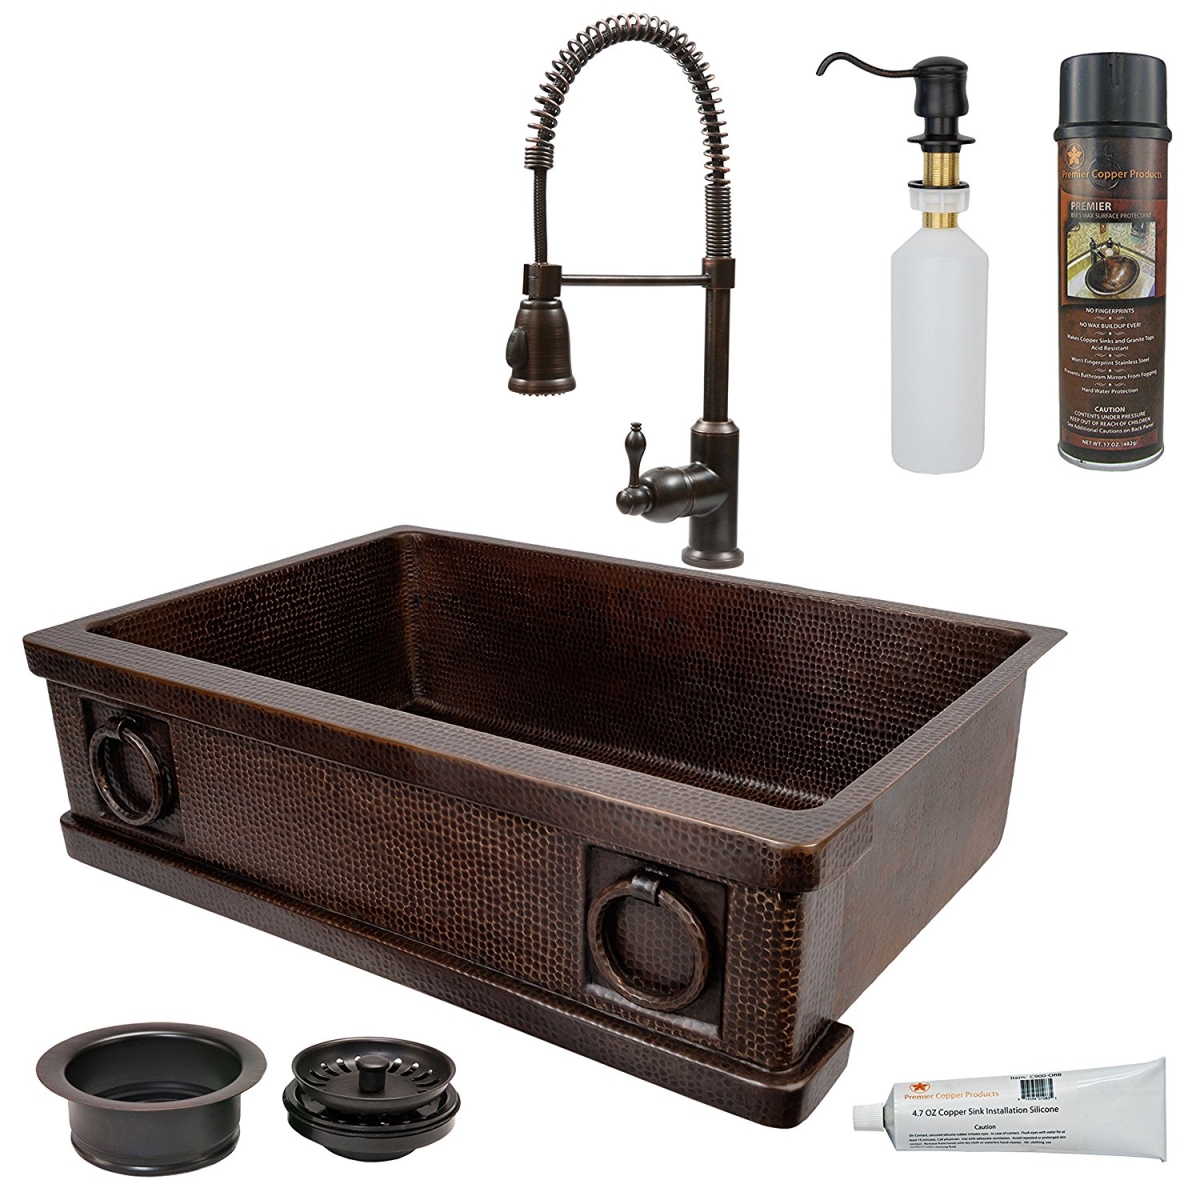 Products Ksp4-kasdb33229r 81.5 Lbs Kitchen Sink, Faucet & Accessories Package